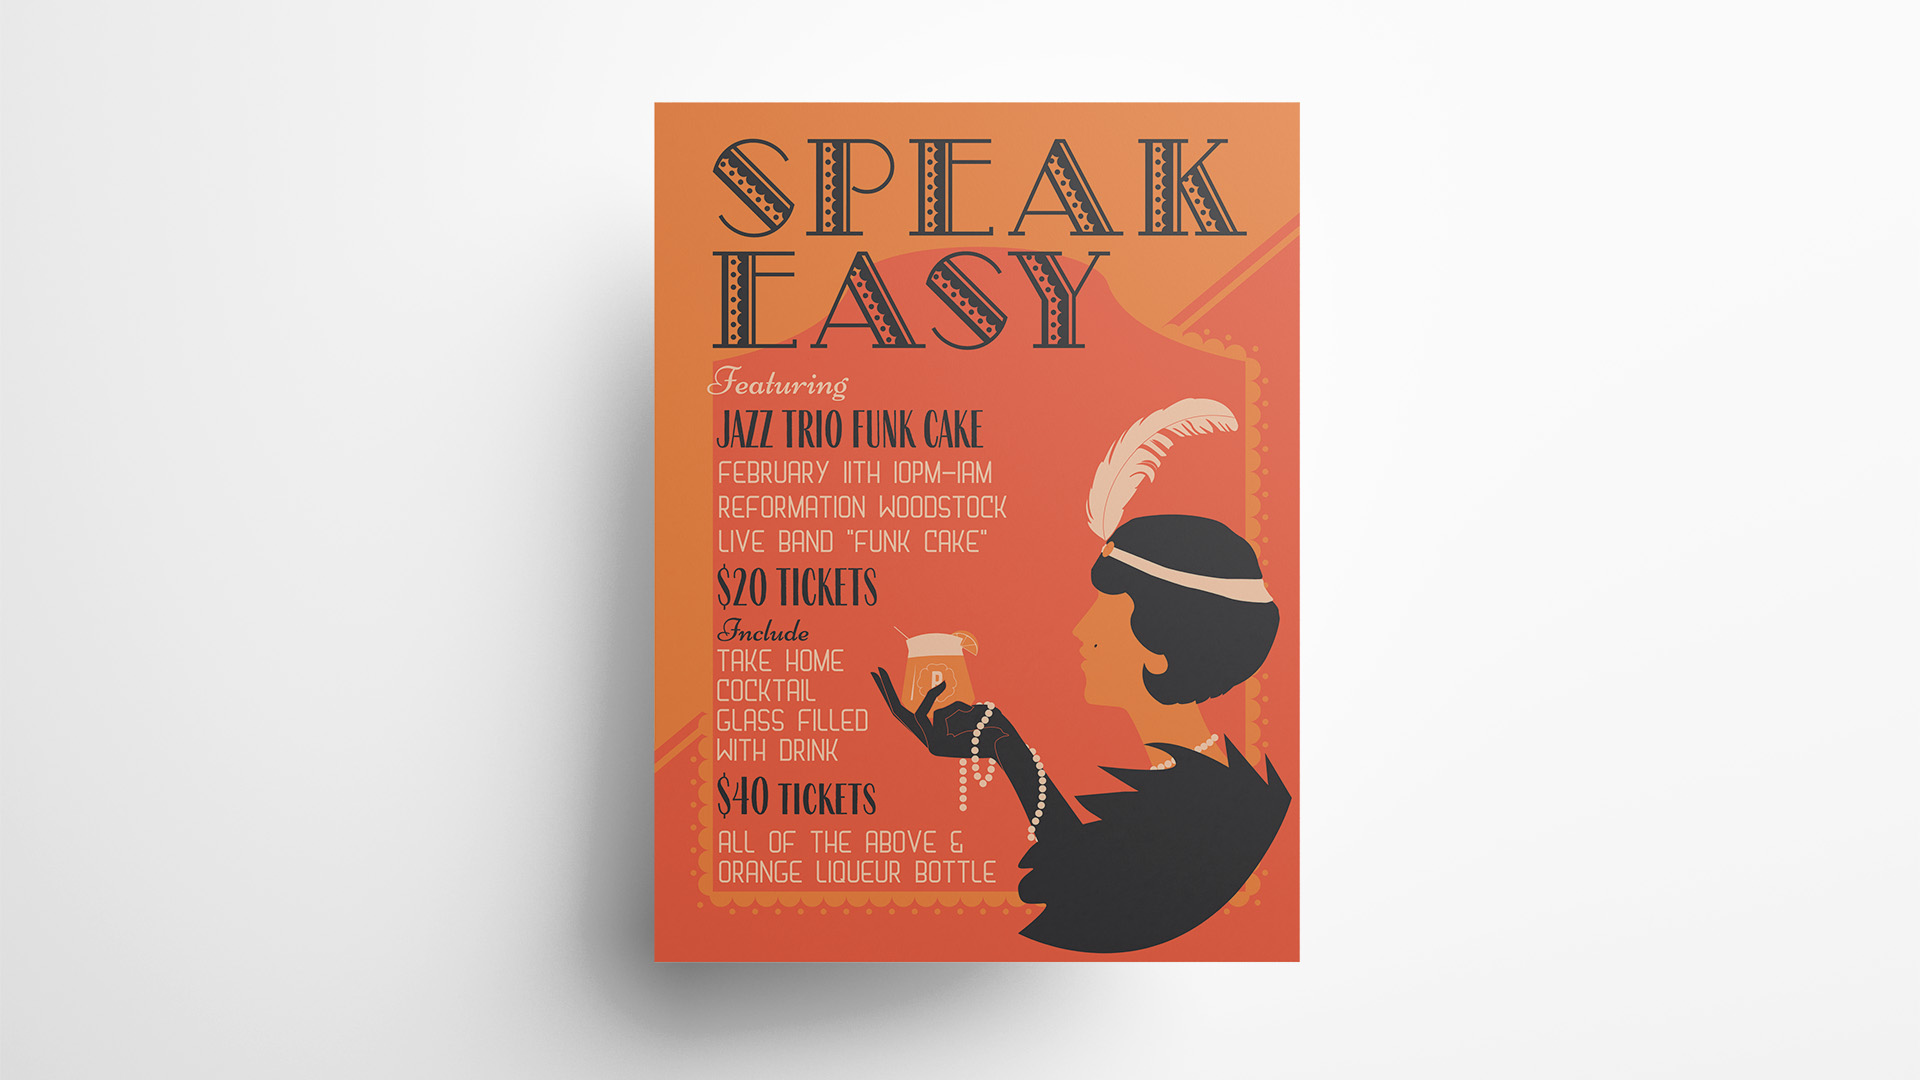 “Speakeasy” / “Speakeasy,” in house event poster for Reformation Brewery, 24 x 36 inches poster print, 2023. This poster was on display at Reformation Brewery for a “Speakeasy” themed night. 